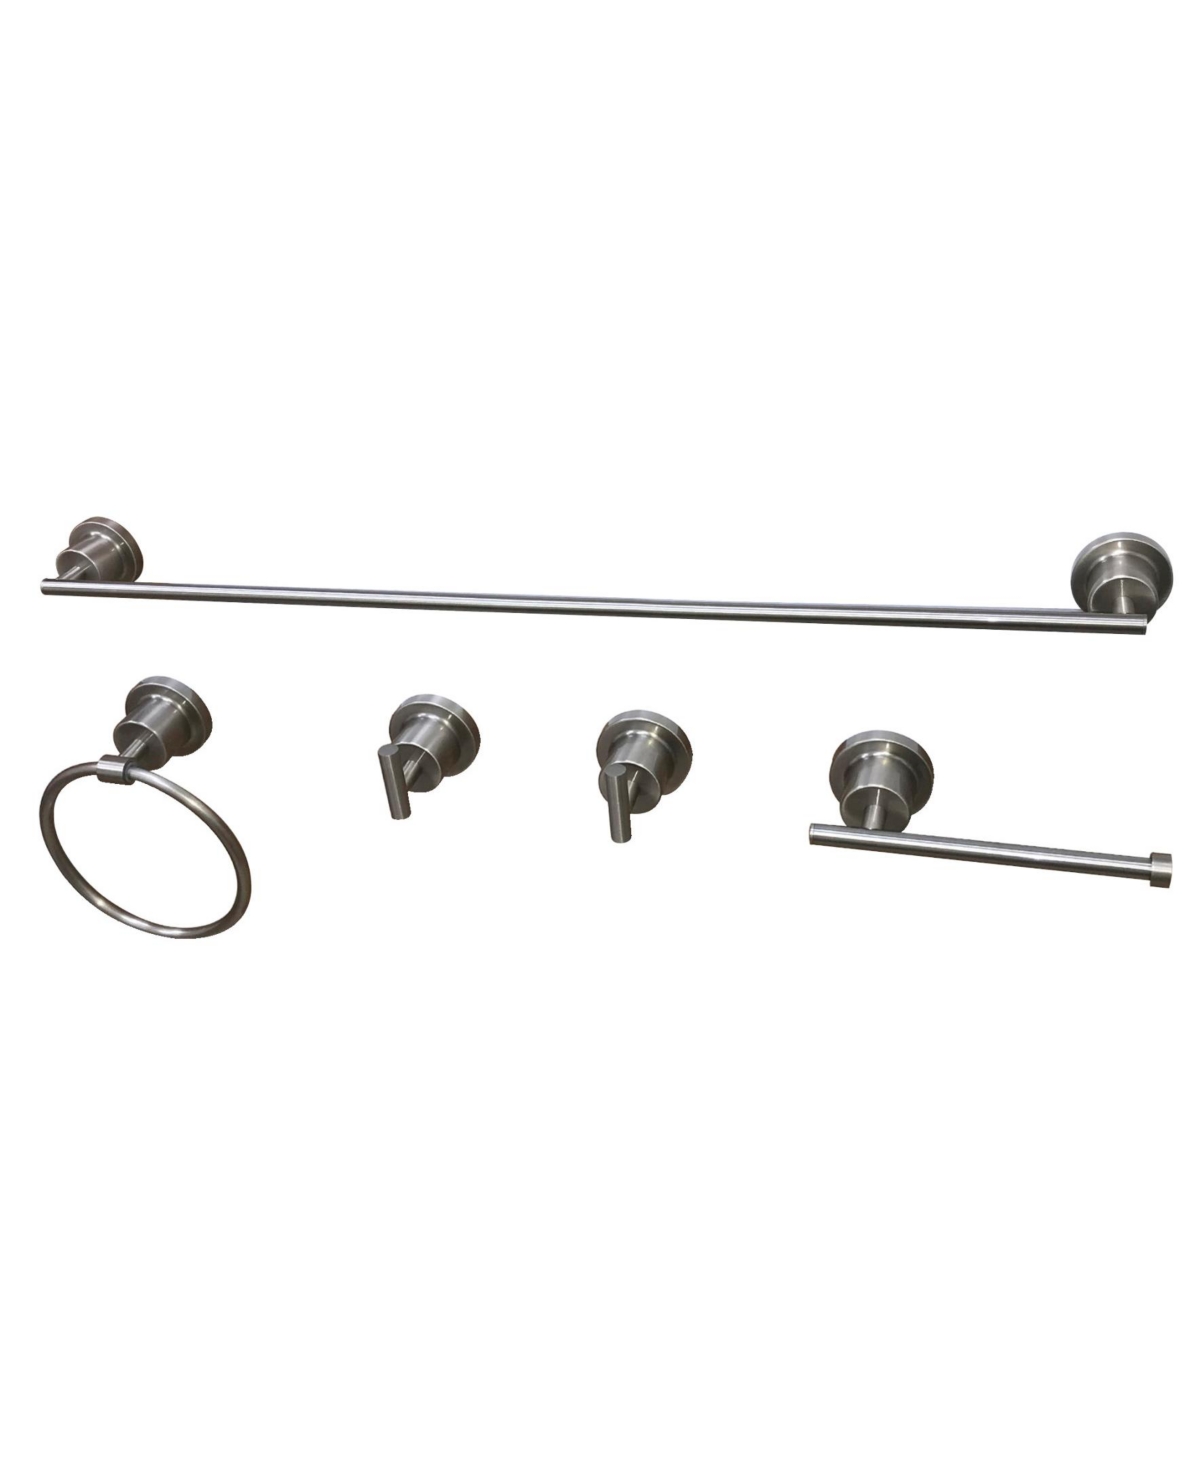 Kingston Brass Concord 5-Pc. Bathroom Accessory Set in Brushed Nickel Bedding